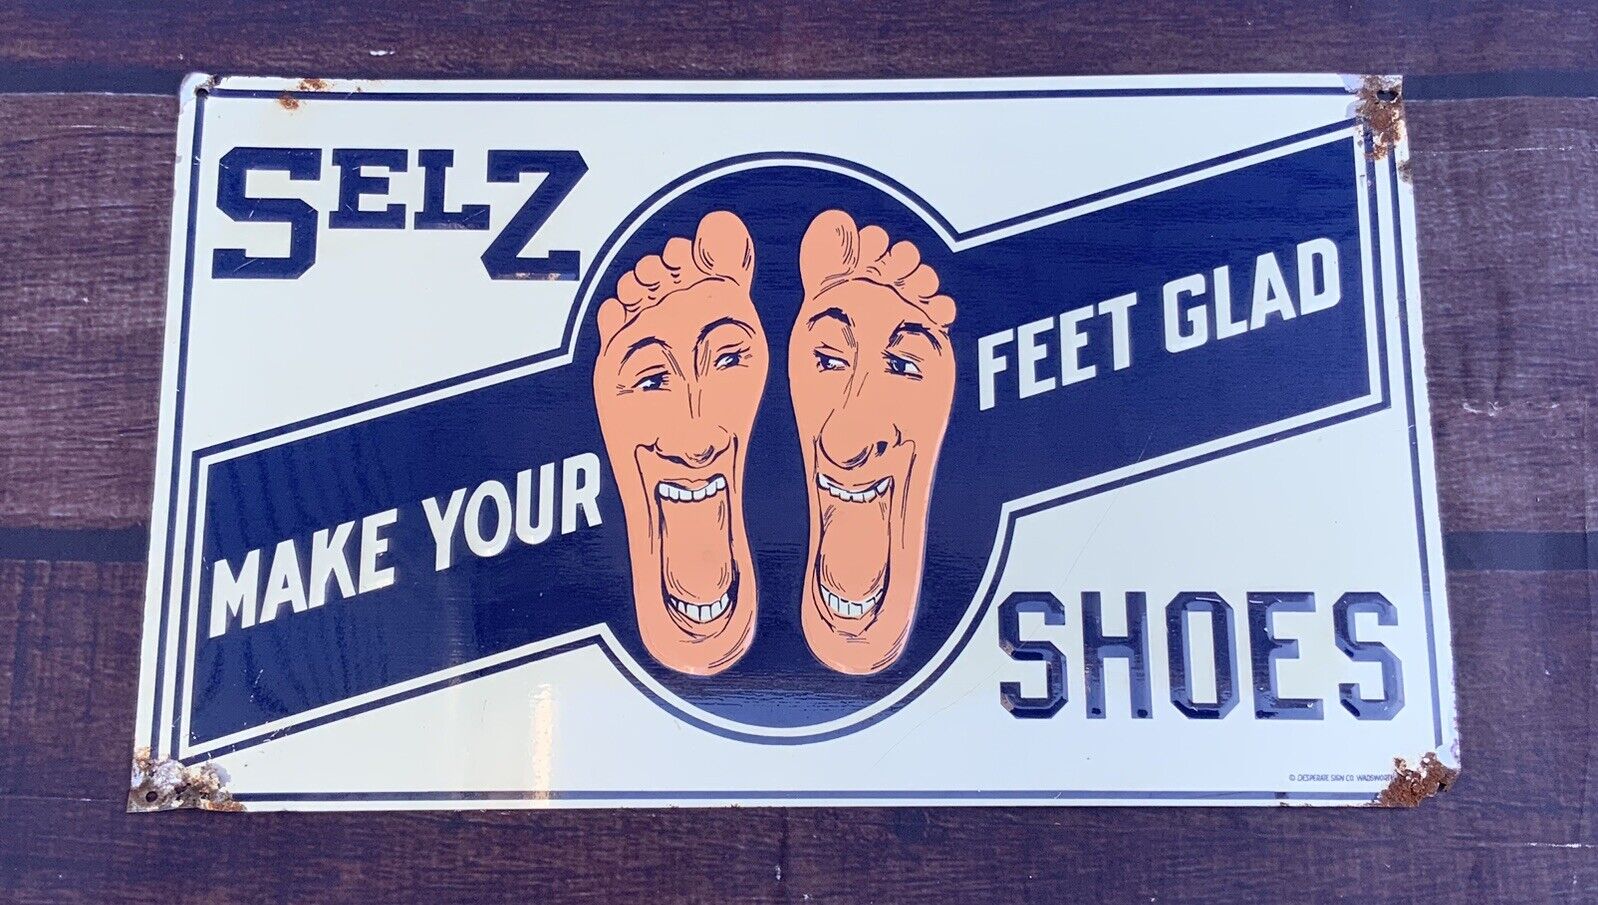 Selz Shoes Make Your Feet Glad Shoe Store 15x9 Embossed Metal Sign